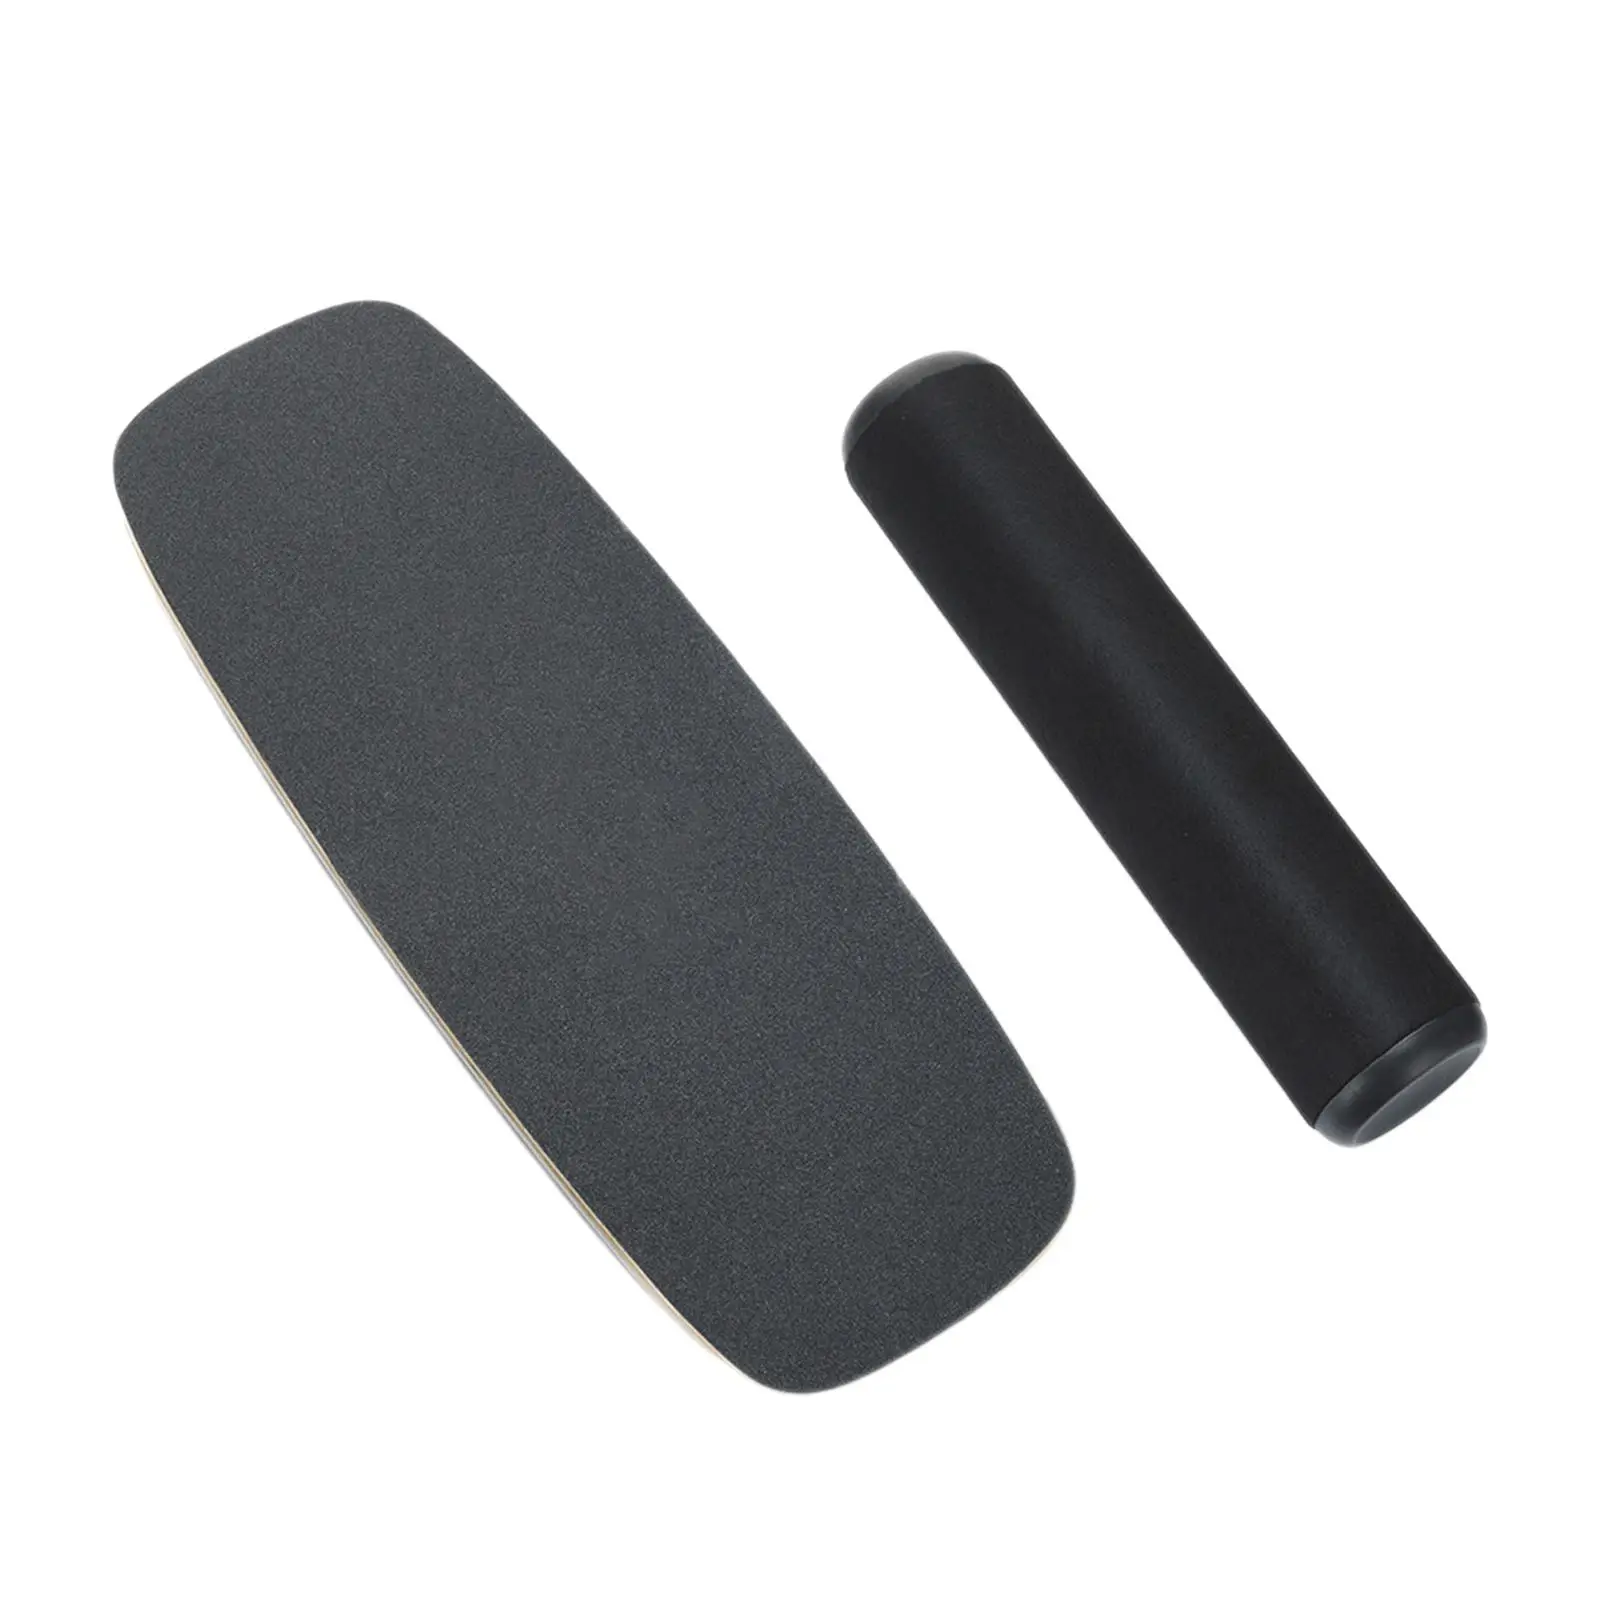 Wooden Balance Board trainer Accessories Balancing Board for Hockey